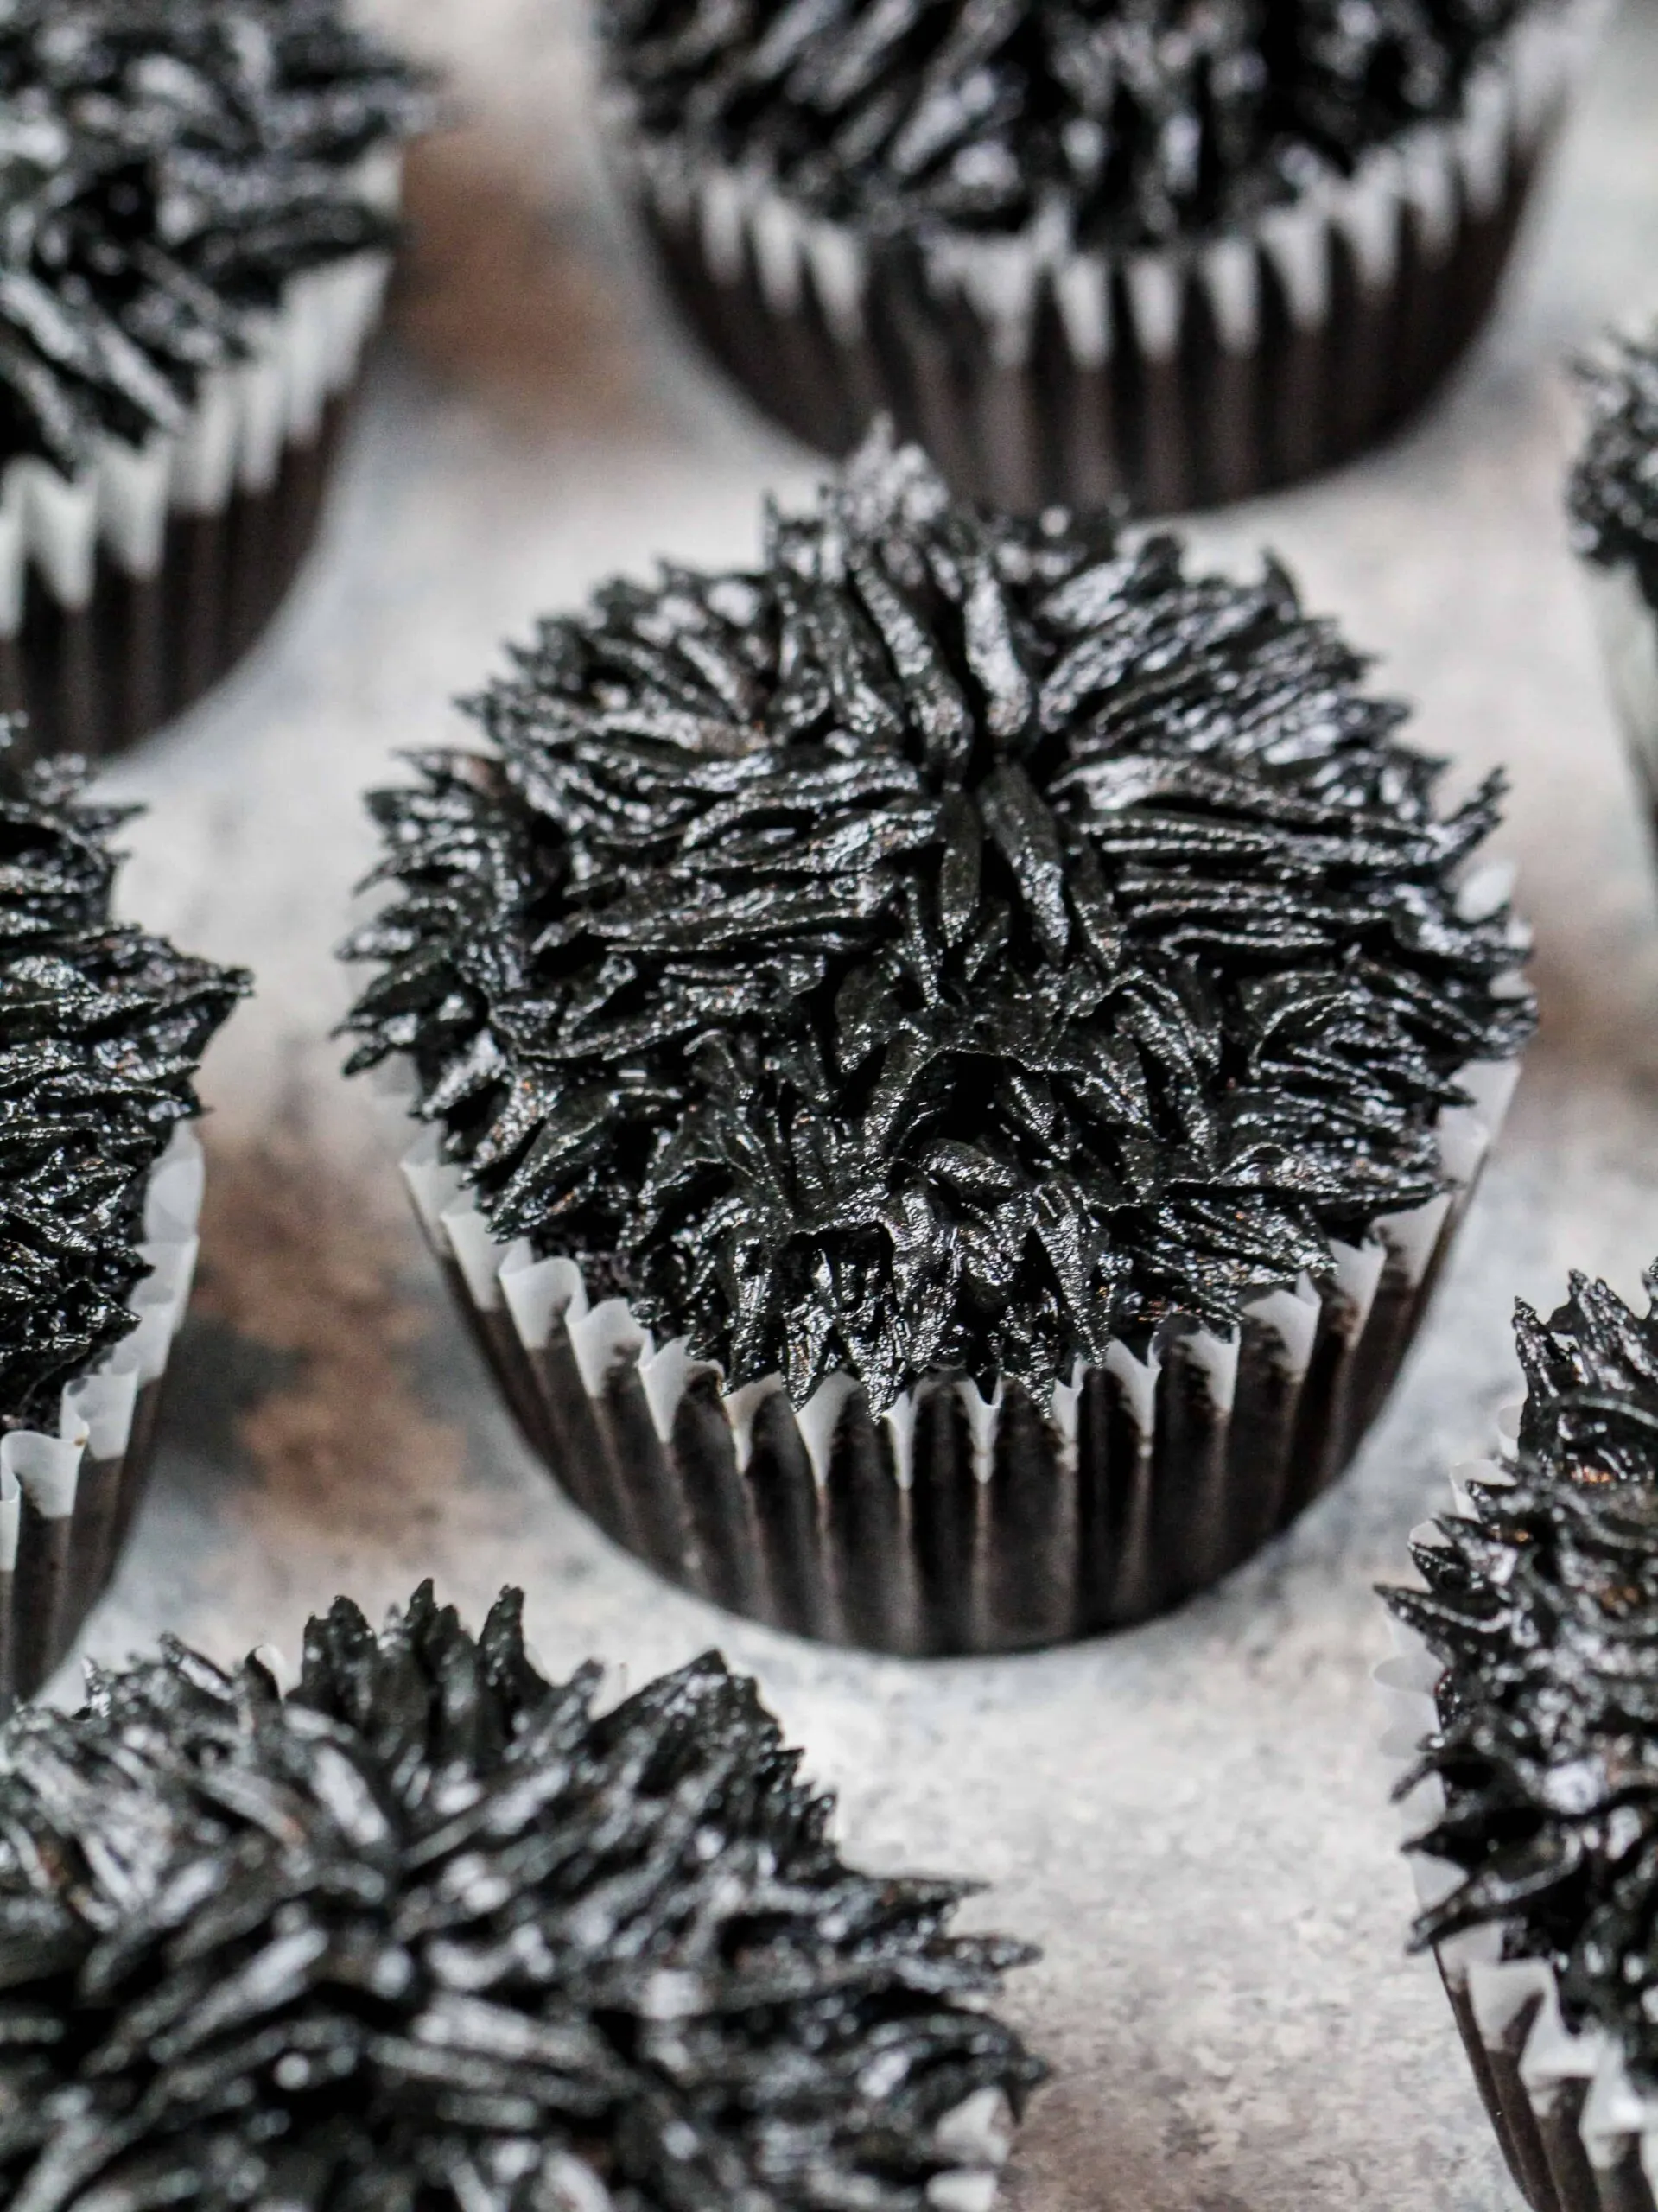 image of cupcakes frosted with black frosting using a grass tip to make soot sprite cupcakes